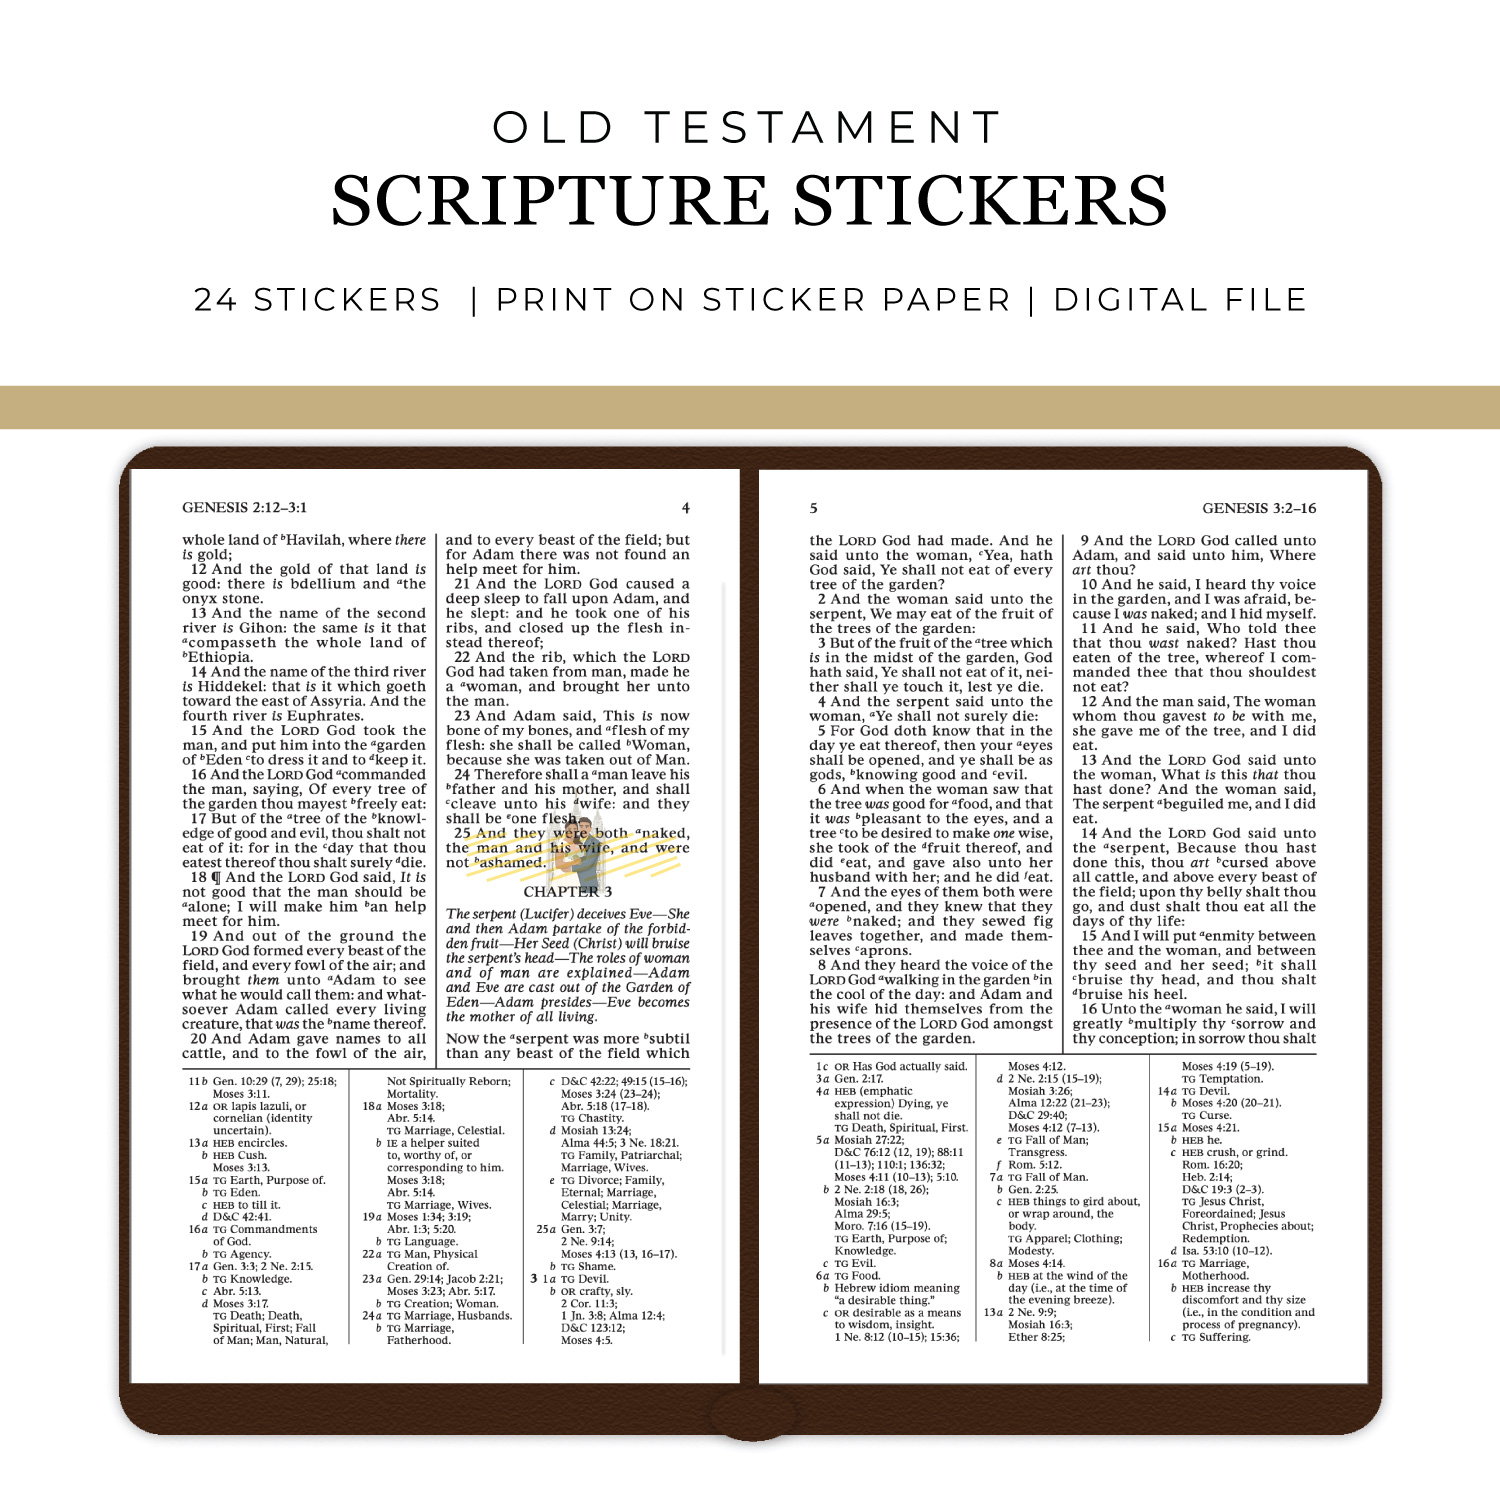 Book of Mormon Seminary Scripture Stickers in LDS Scripture Stickers on